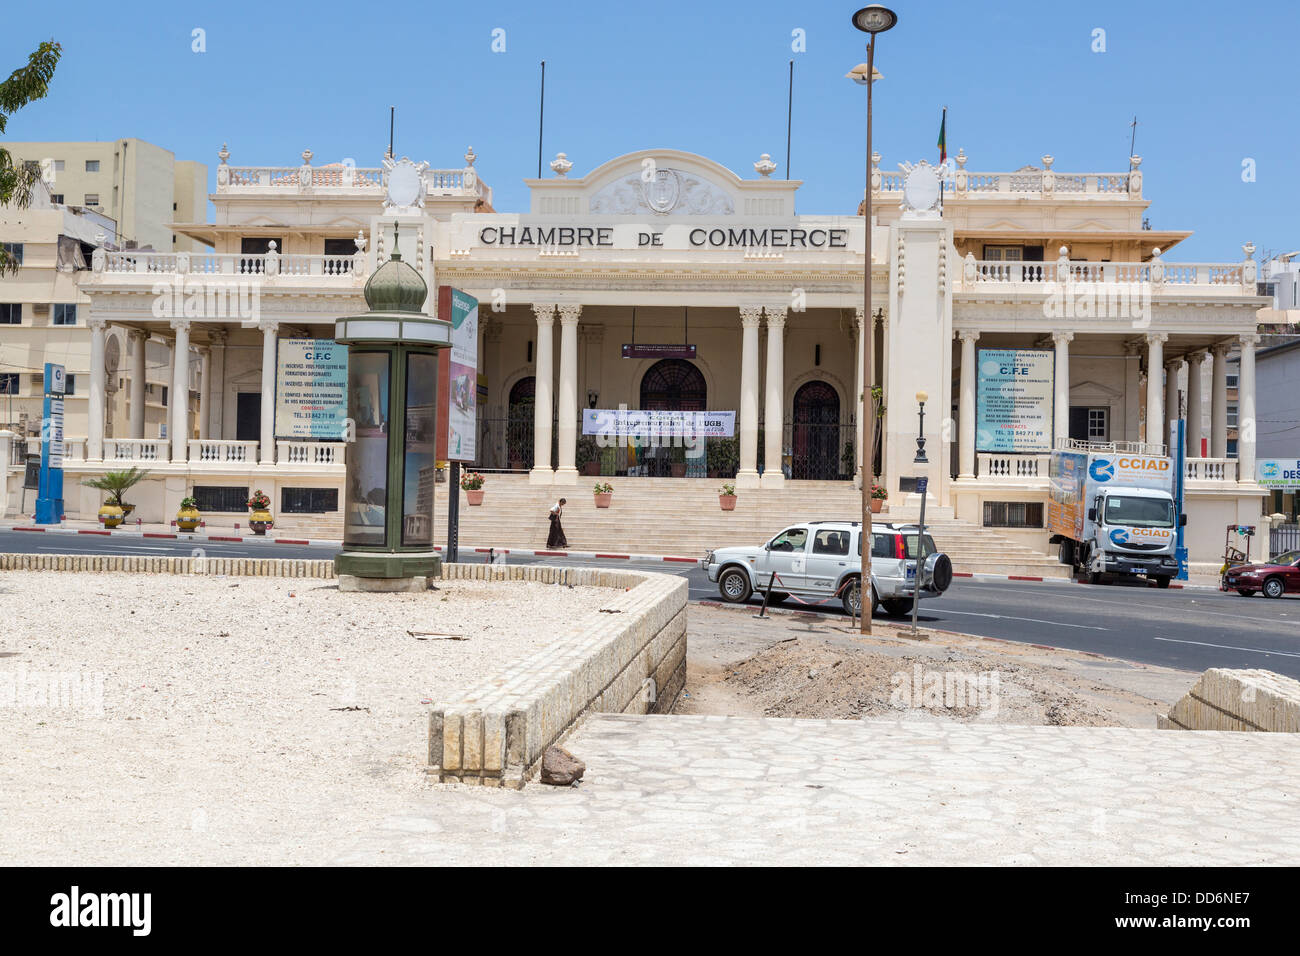 Dakar, Senegal. Chamber of Commerce, in a Beaux Arts Architectural Style from the French Colonial Period. Stock Photo